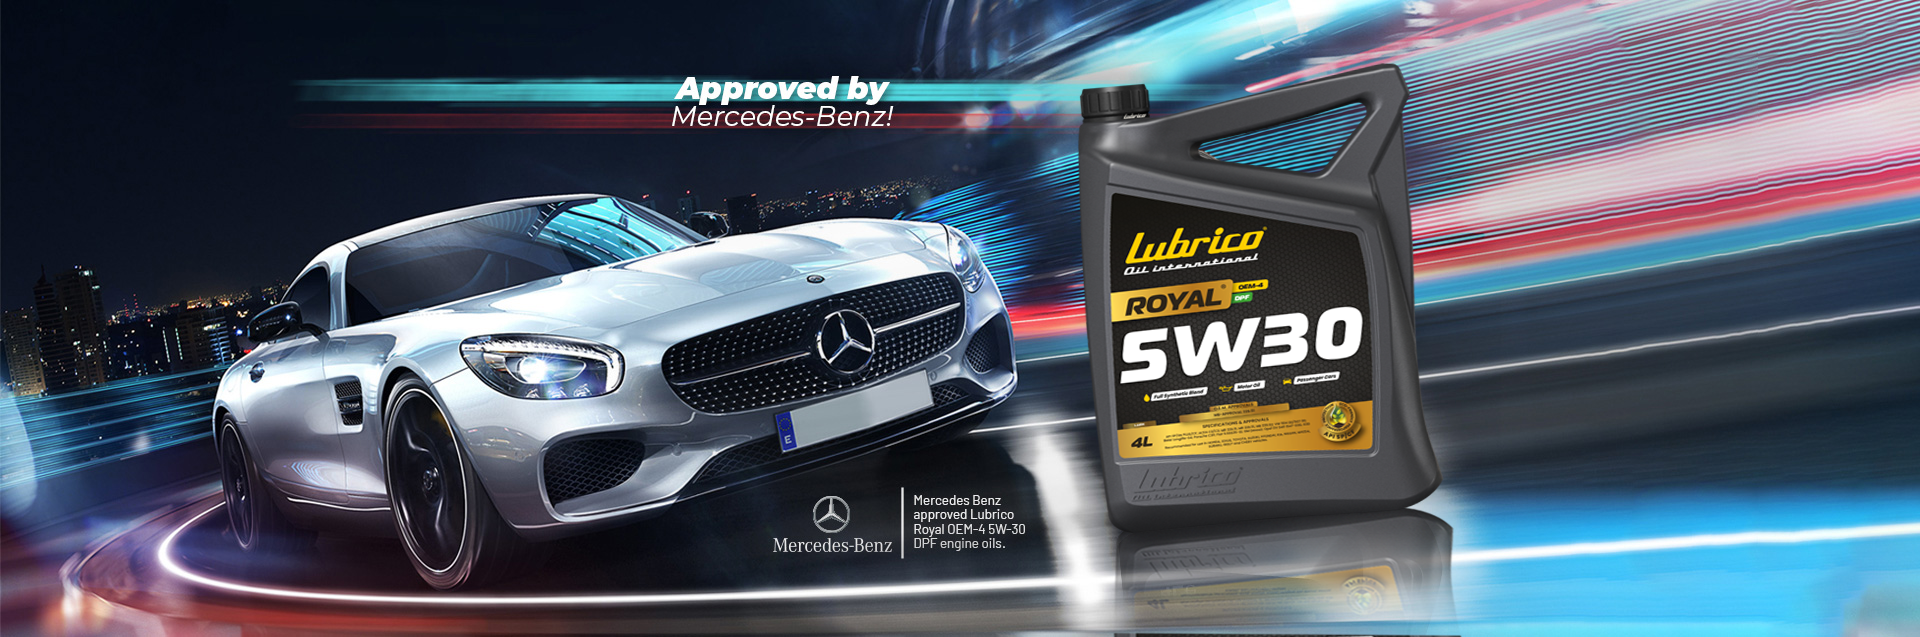 Approved by Mercedes-Benz!